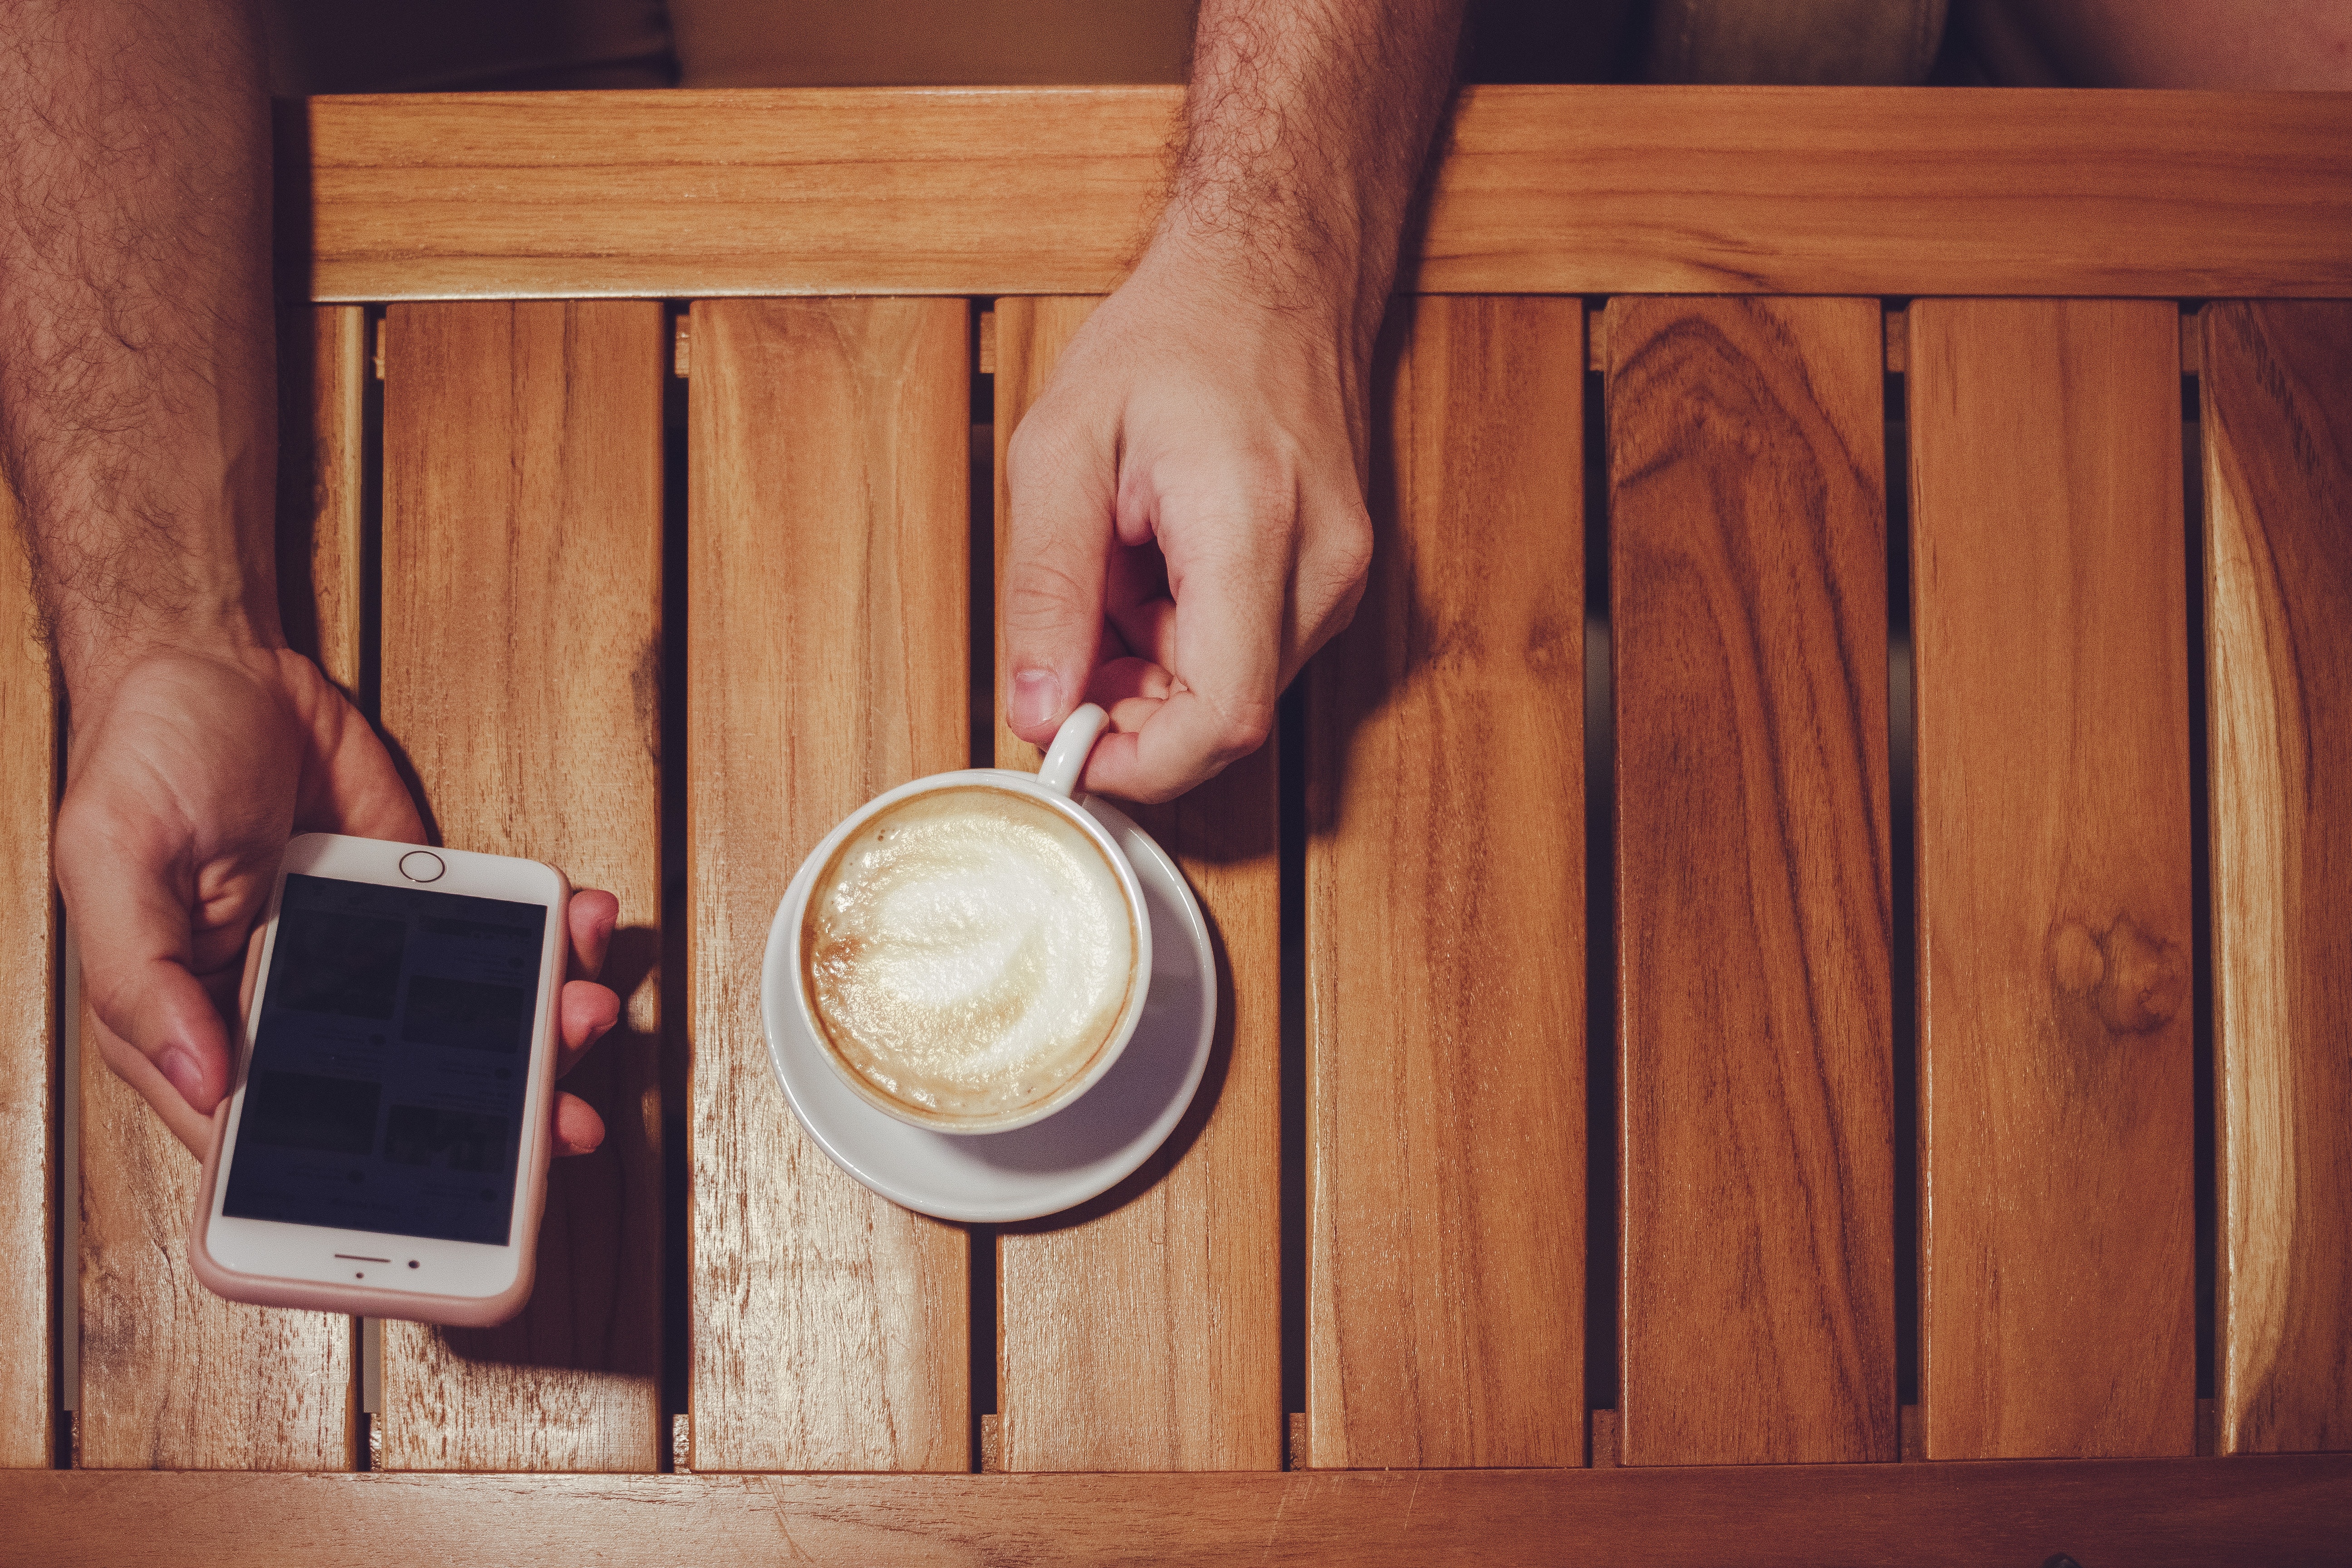 Person Holding Turned Off Gold Iphone 6 With Case and White Ceramic Cup Filled With Latte, Iphone, Wooden, Wood, Table, HQ Photo